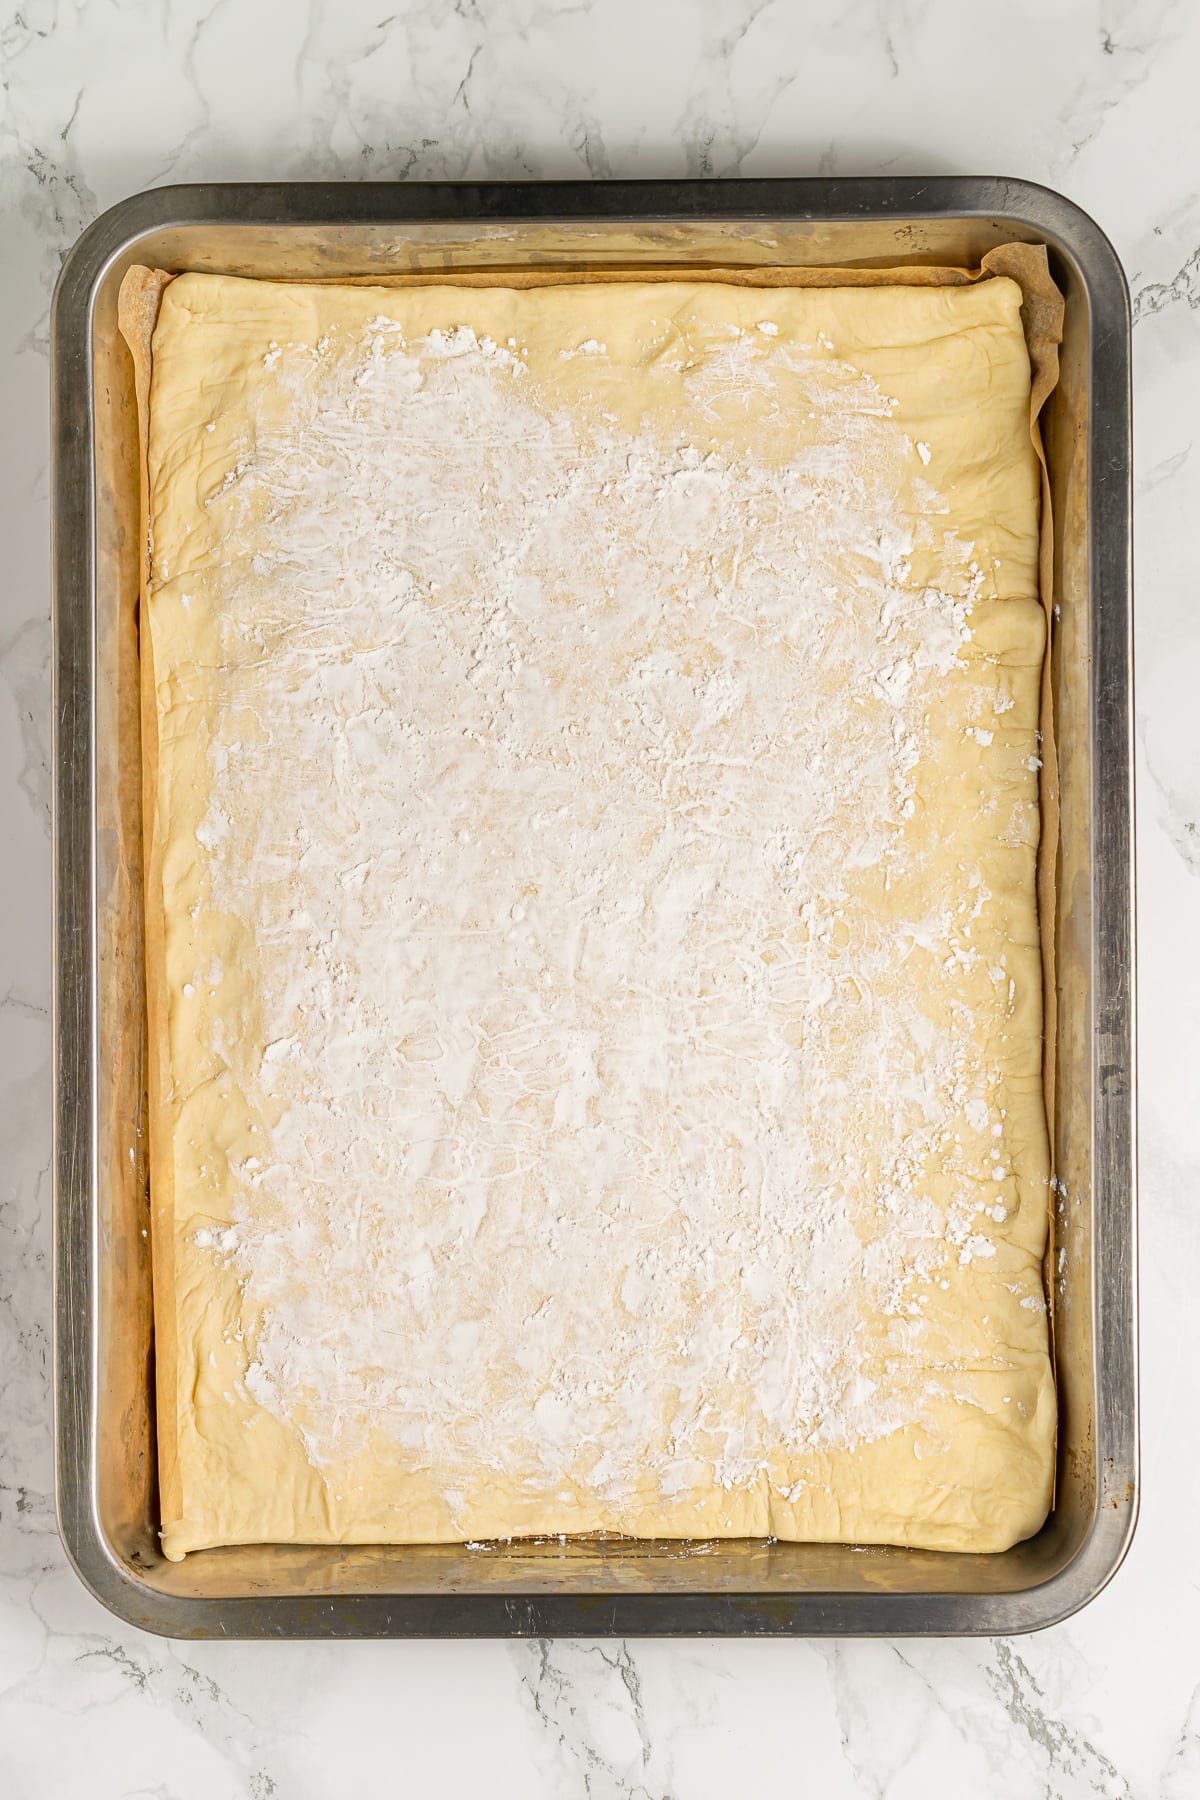 A baking tray lined with parchment paper and unrolled pie dough dusted with flour, ready for assembling an apple tart.